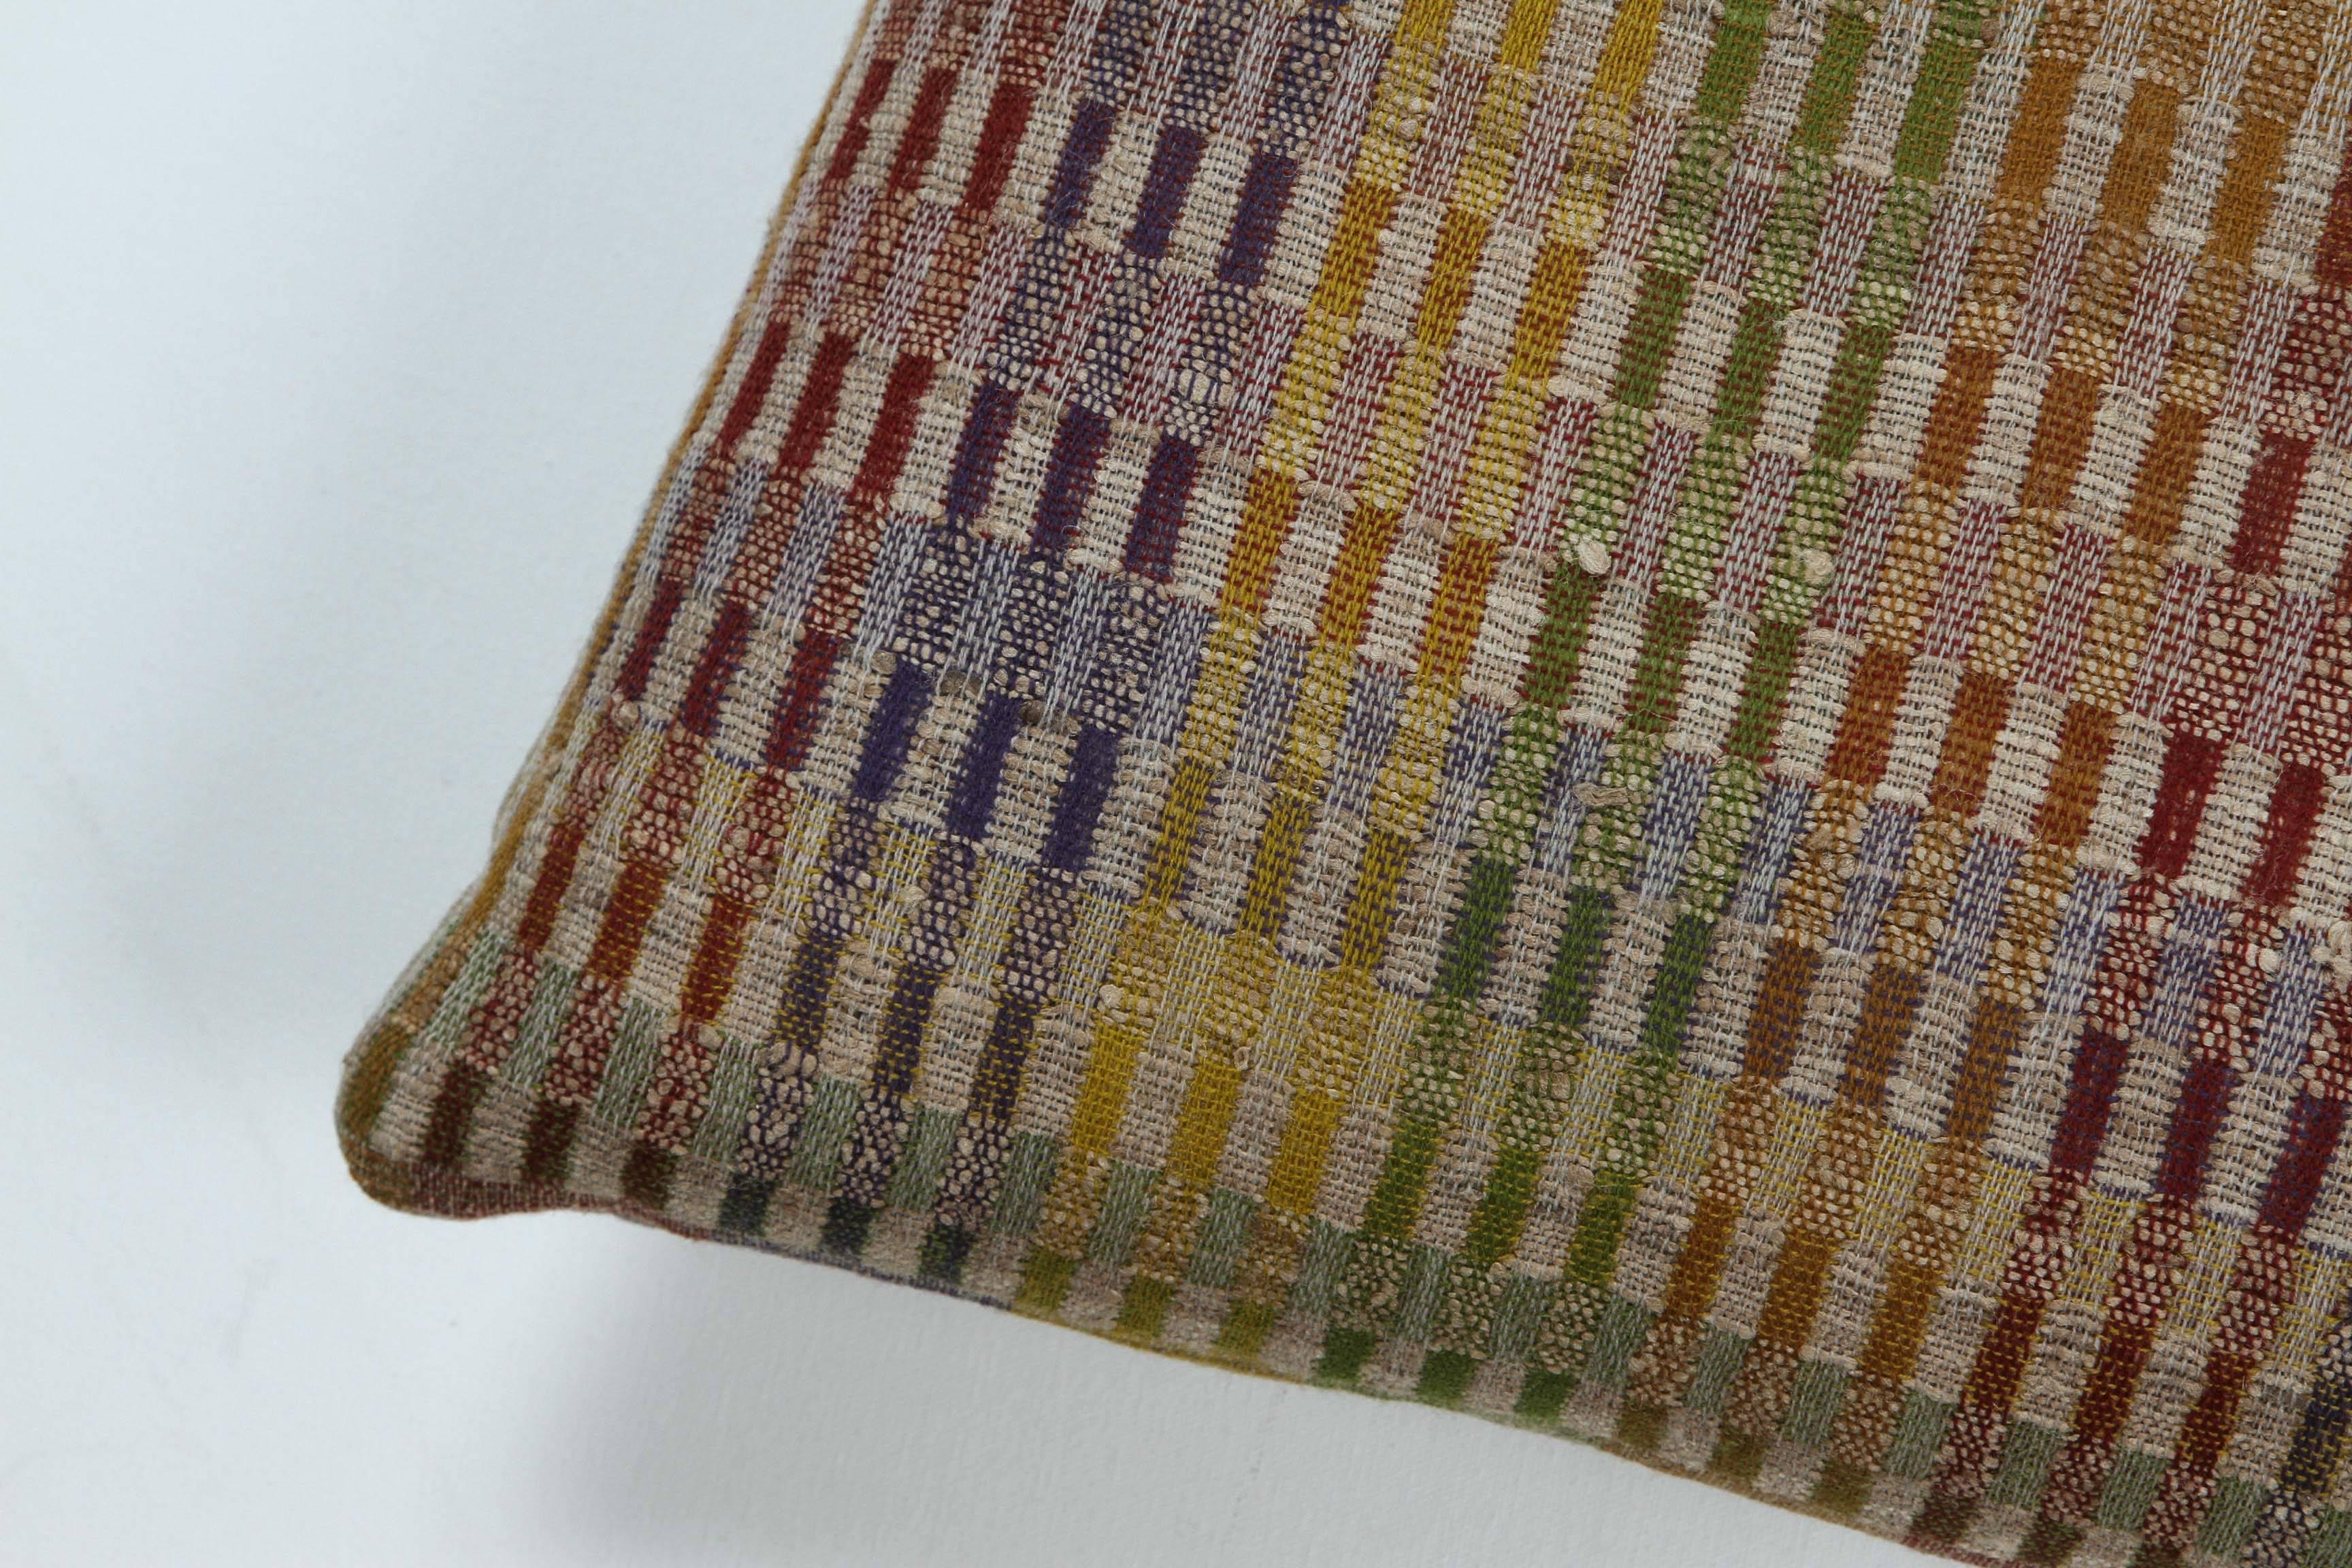 Bauhaus Indian Hand Woven Pillow.   Red, Orange, Green, Yellow, Purple.   Wool and silk. For Sale